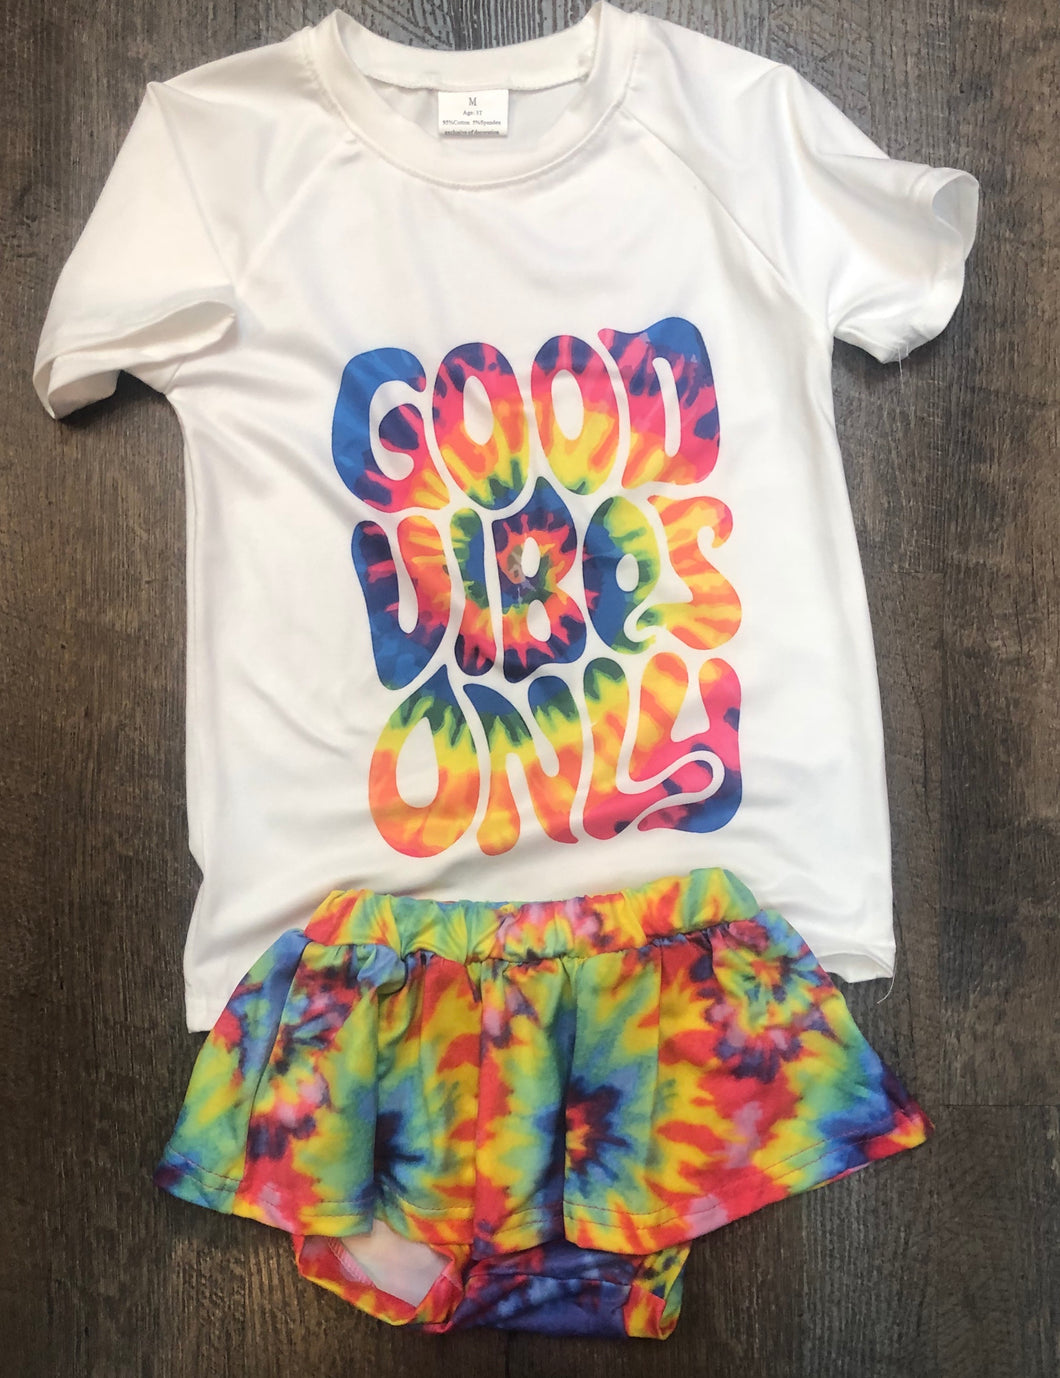 Good Vibes Only set